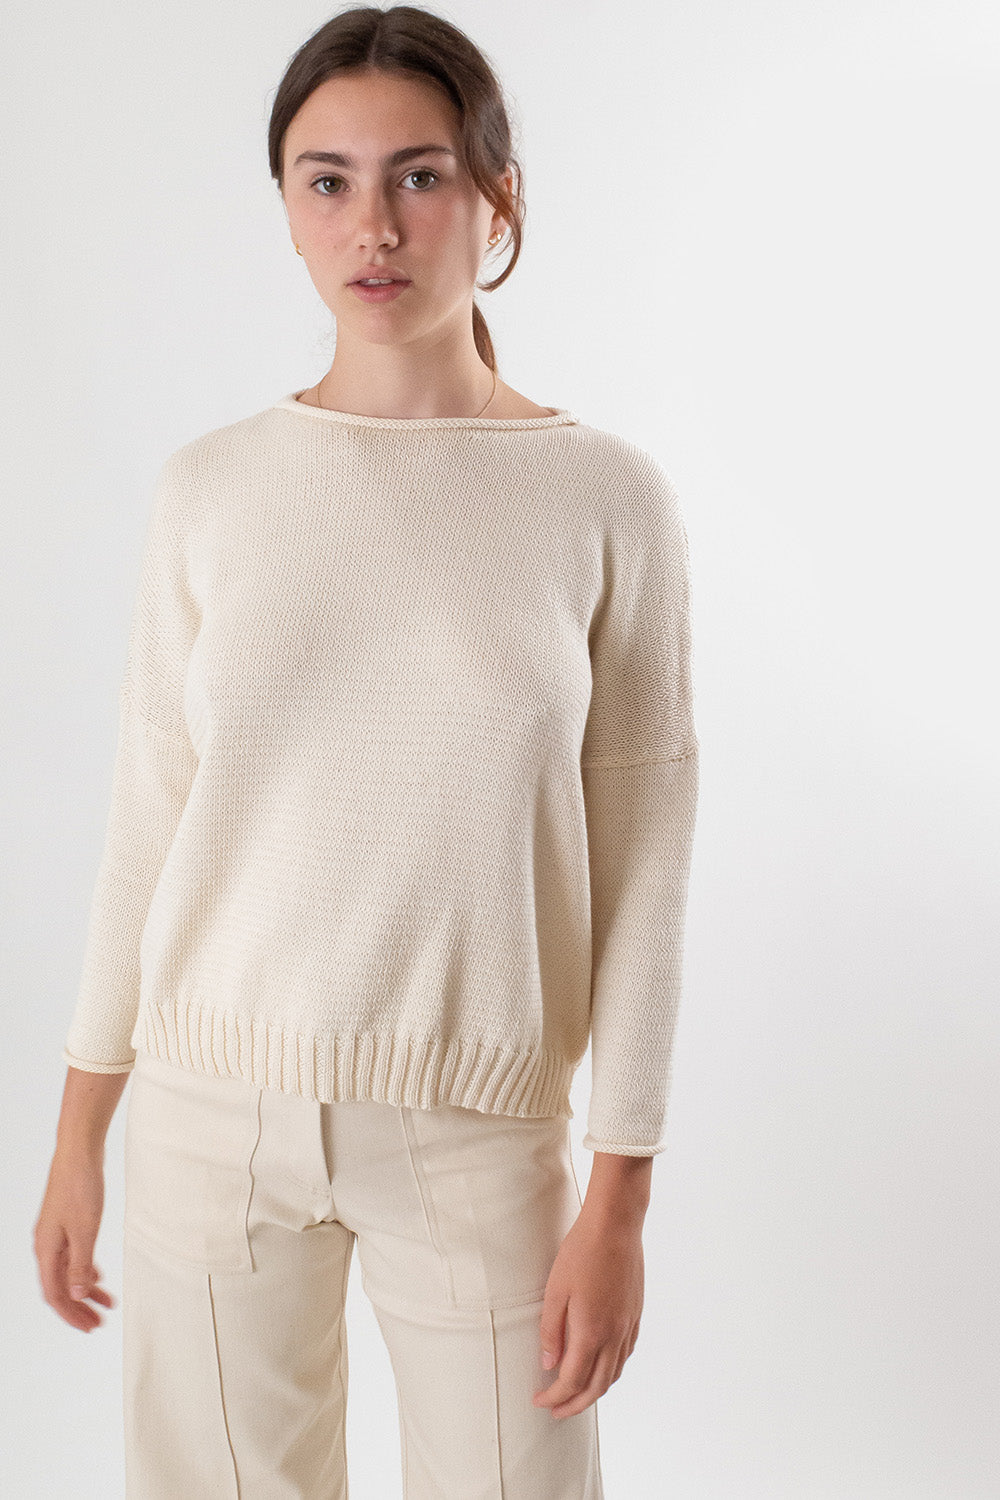 Cotton Rollneck Sweater in Natural